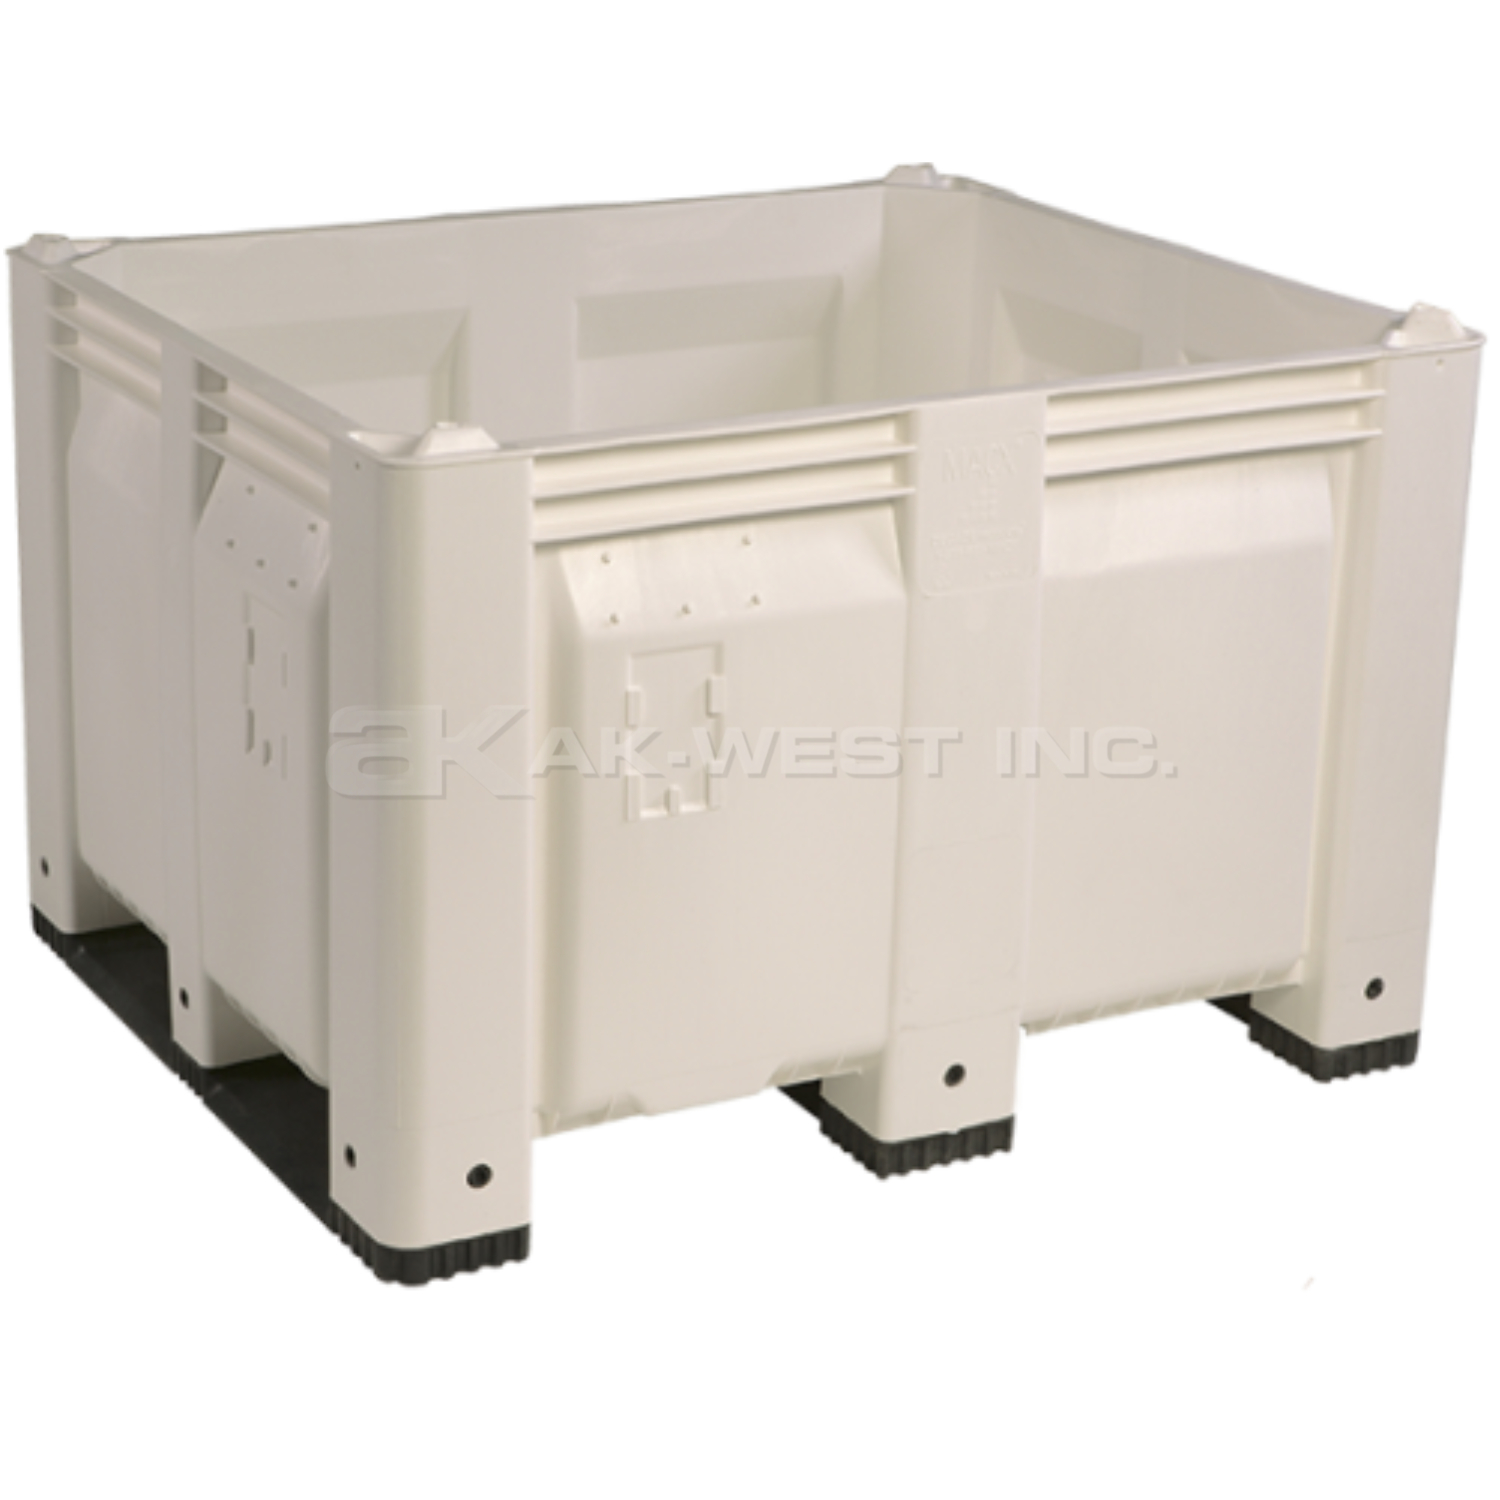 White, 48"L x 40"W x 31"H Bulk Container w/ Solid Sides, Short Side Runners